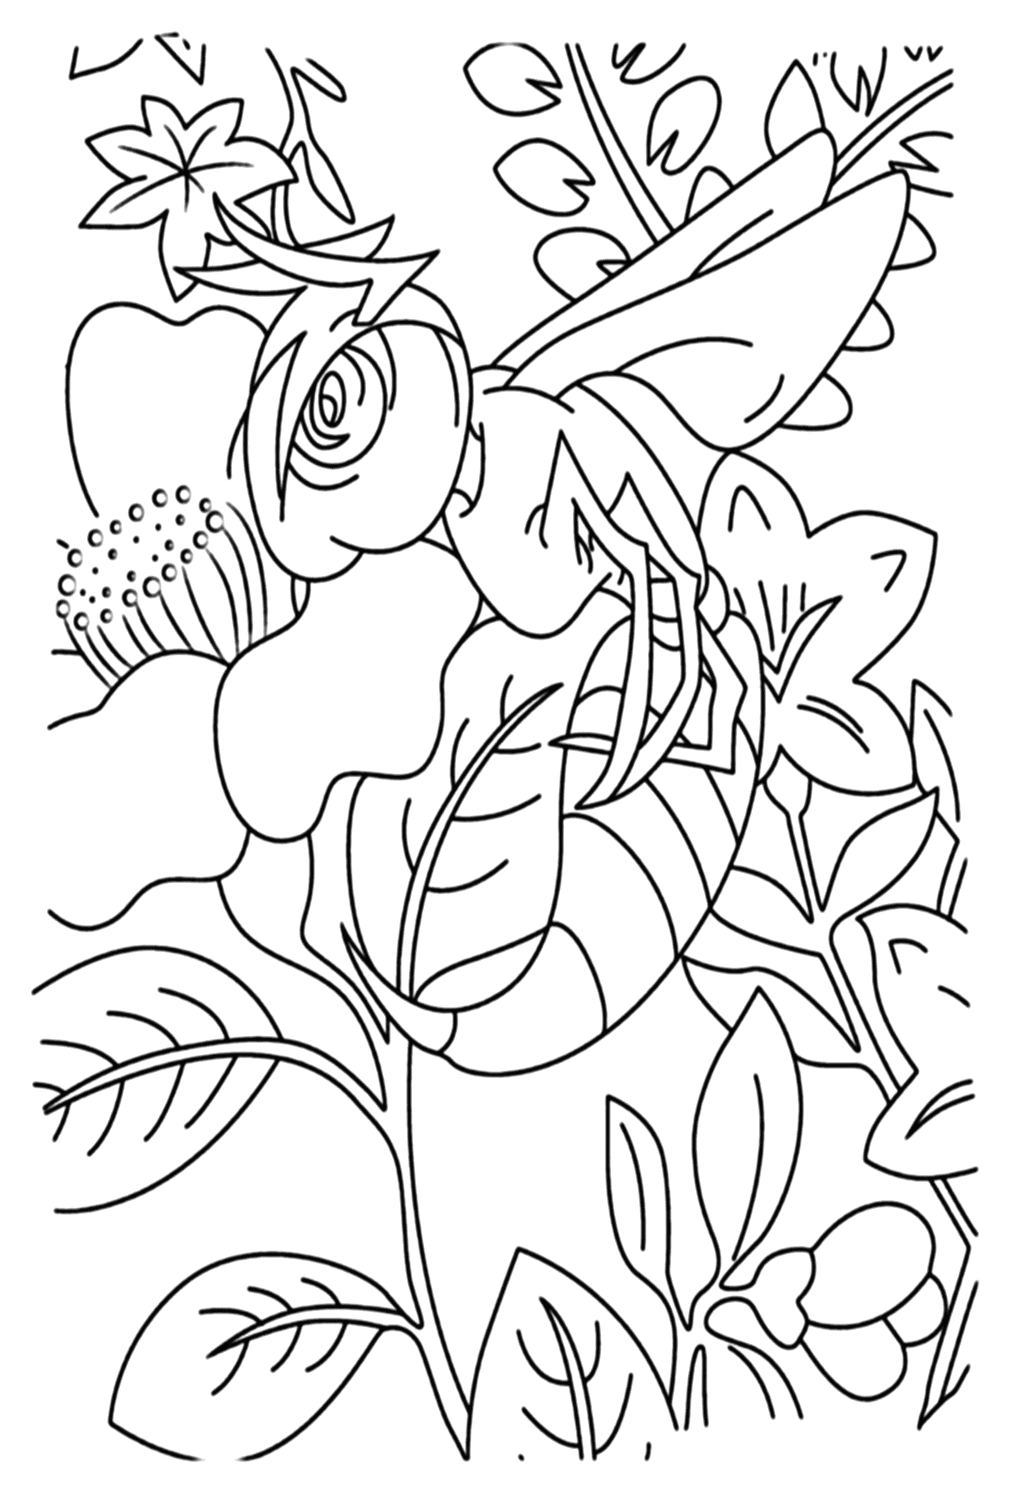 Wasp Coloring Page To Print from Wasp